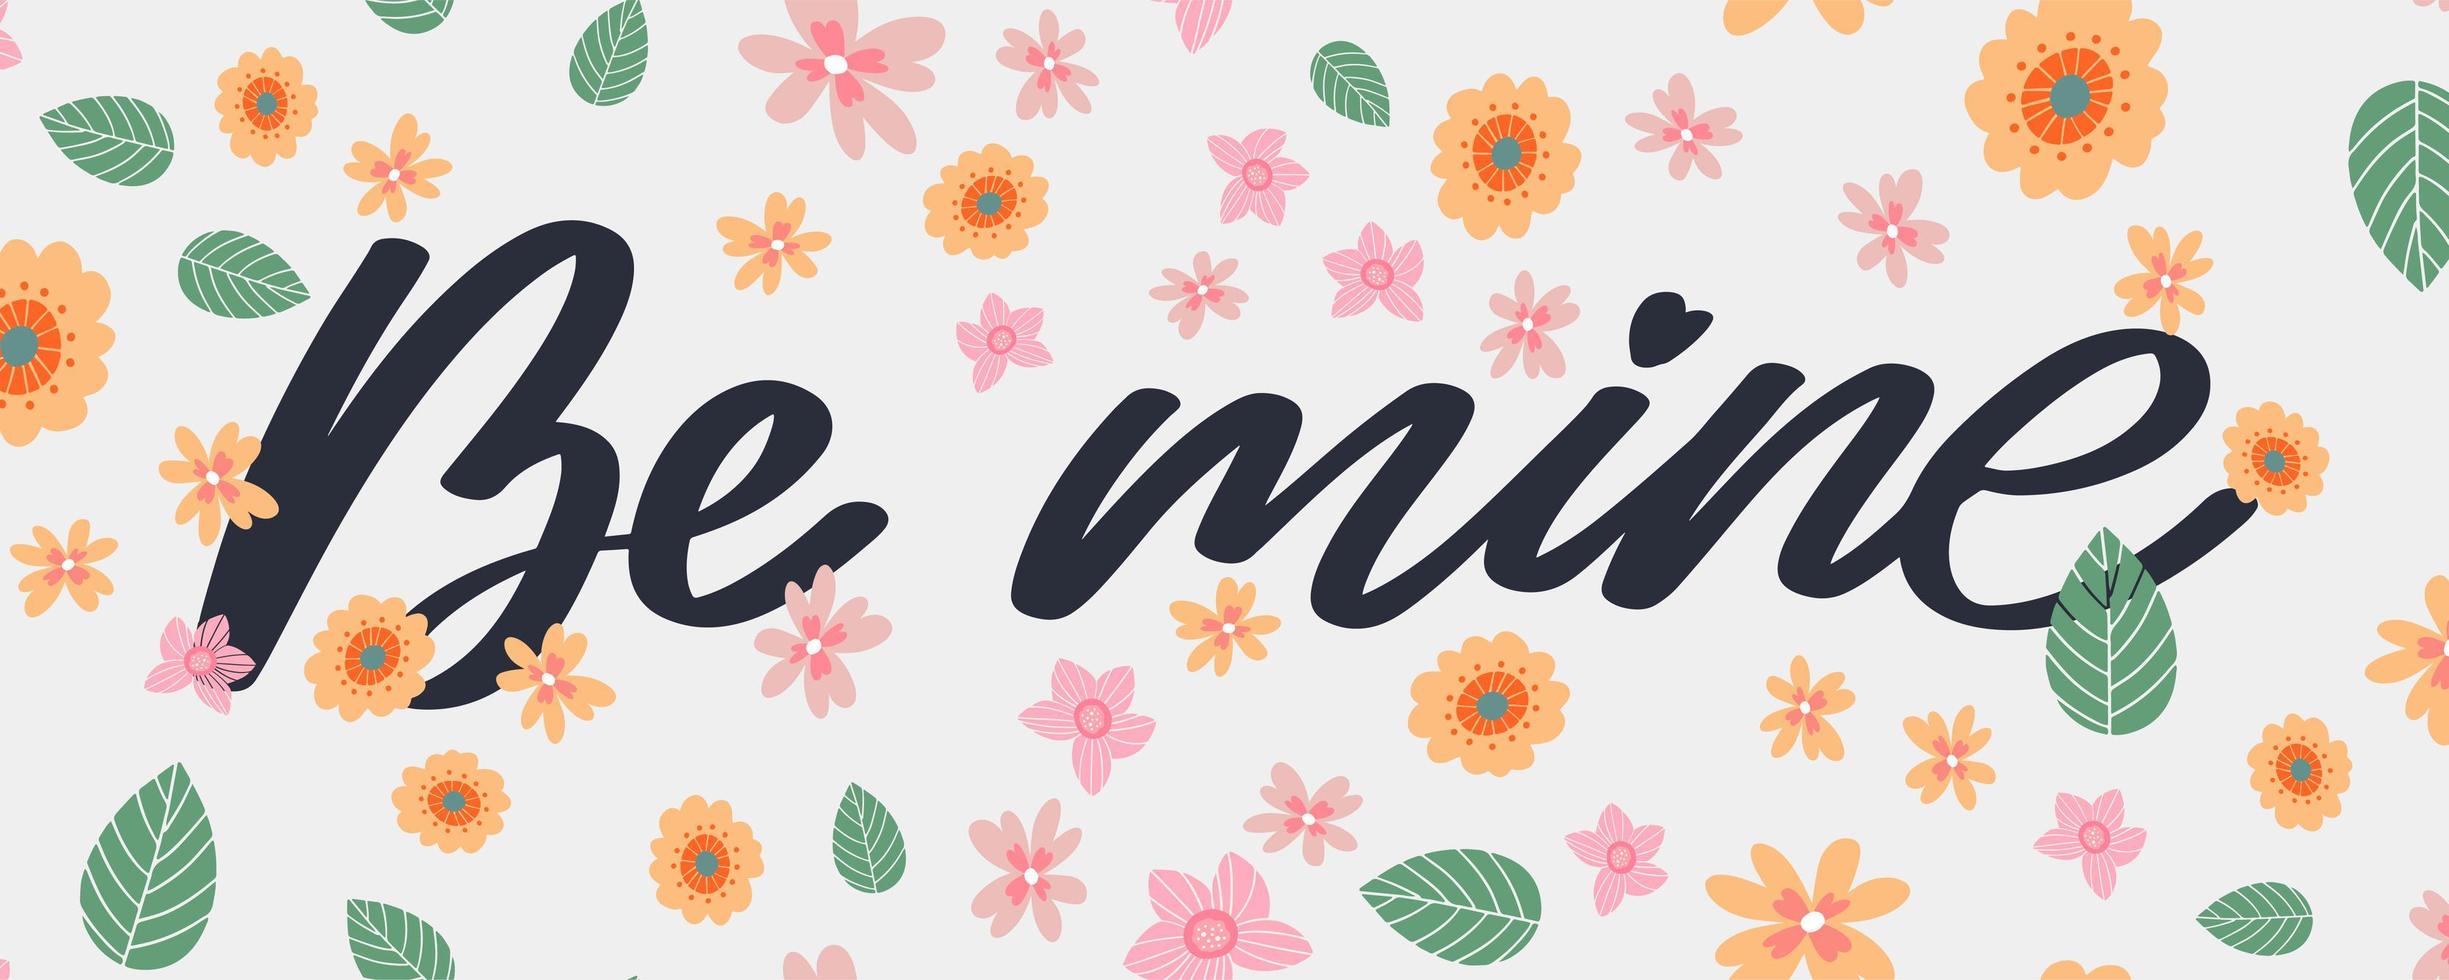 Be mine Valentine's day template for banner design. Background Romantic background. Hand lettering. vector